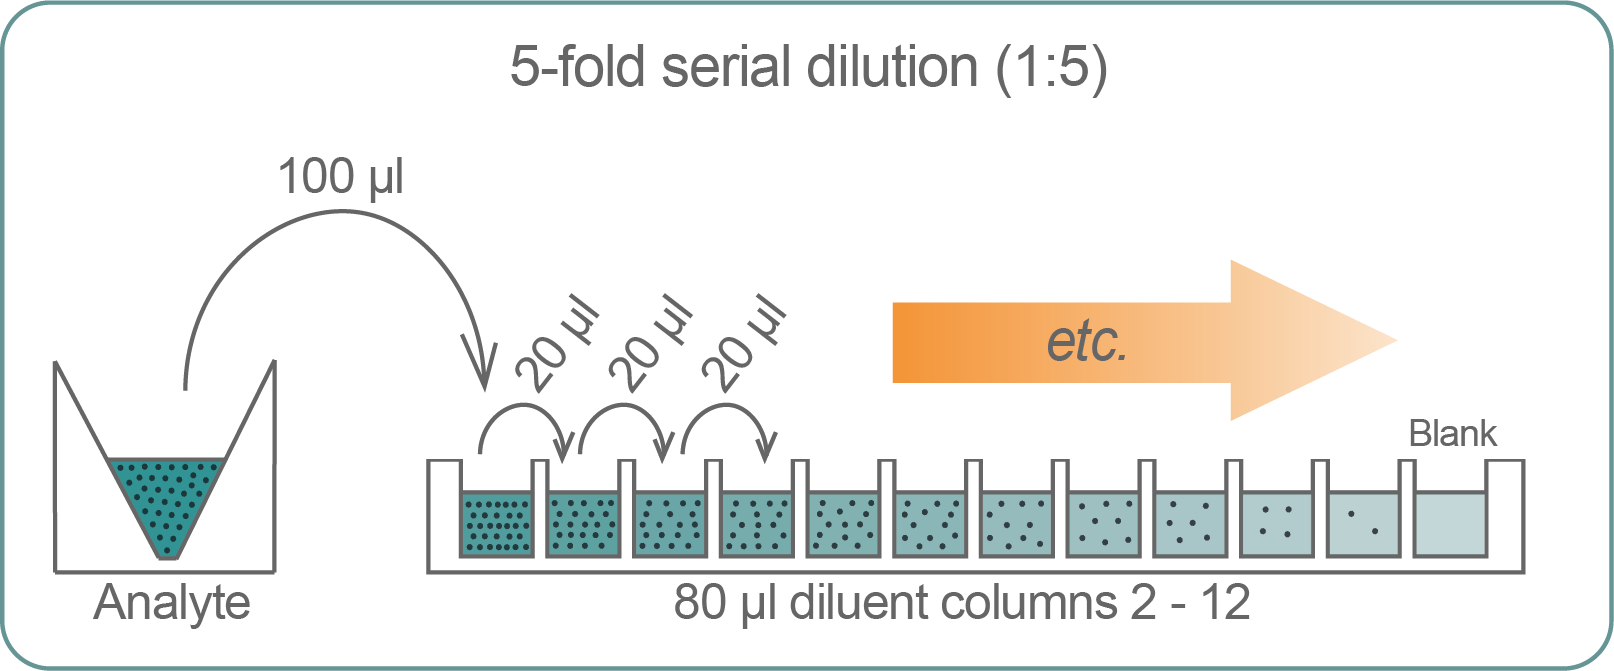 How to perform serial dilution in 96 well flat-bottom plates (5-fold). Alt text: An illustration demonstrating the step-by-step procedure of how to perform a 5-fold serial dilution in 96 well flat-bottom plates.